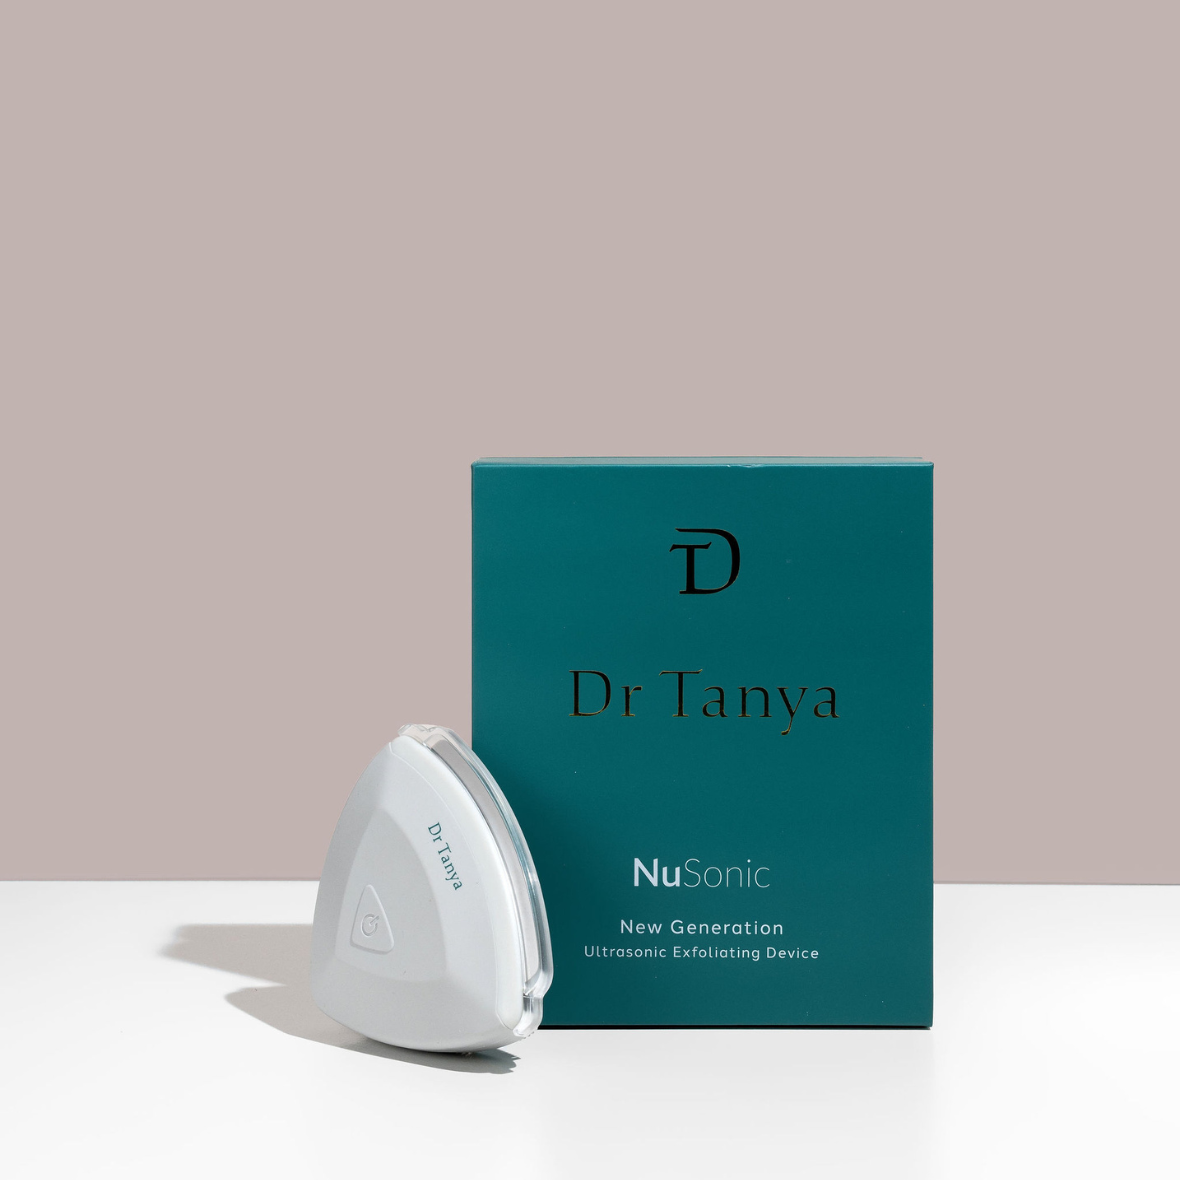 A white triangle-shaped face exfoliating device propped against a green box with gold and white text